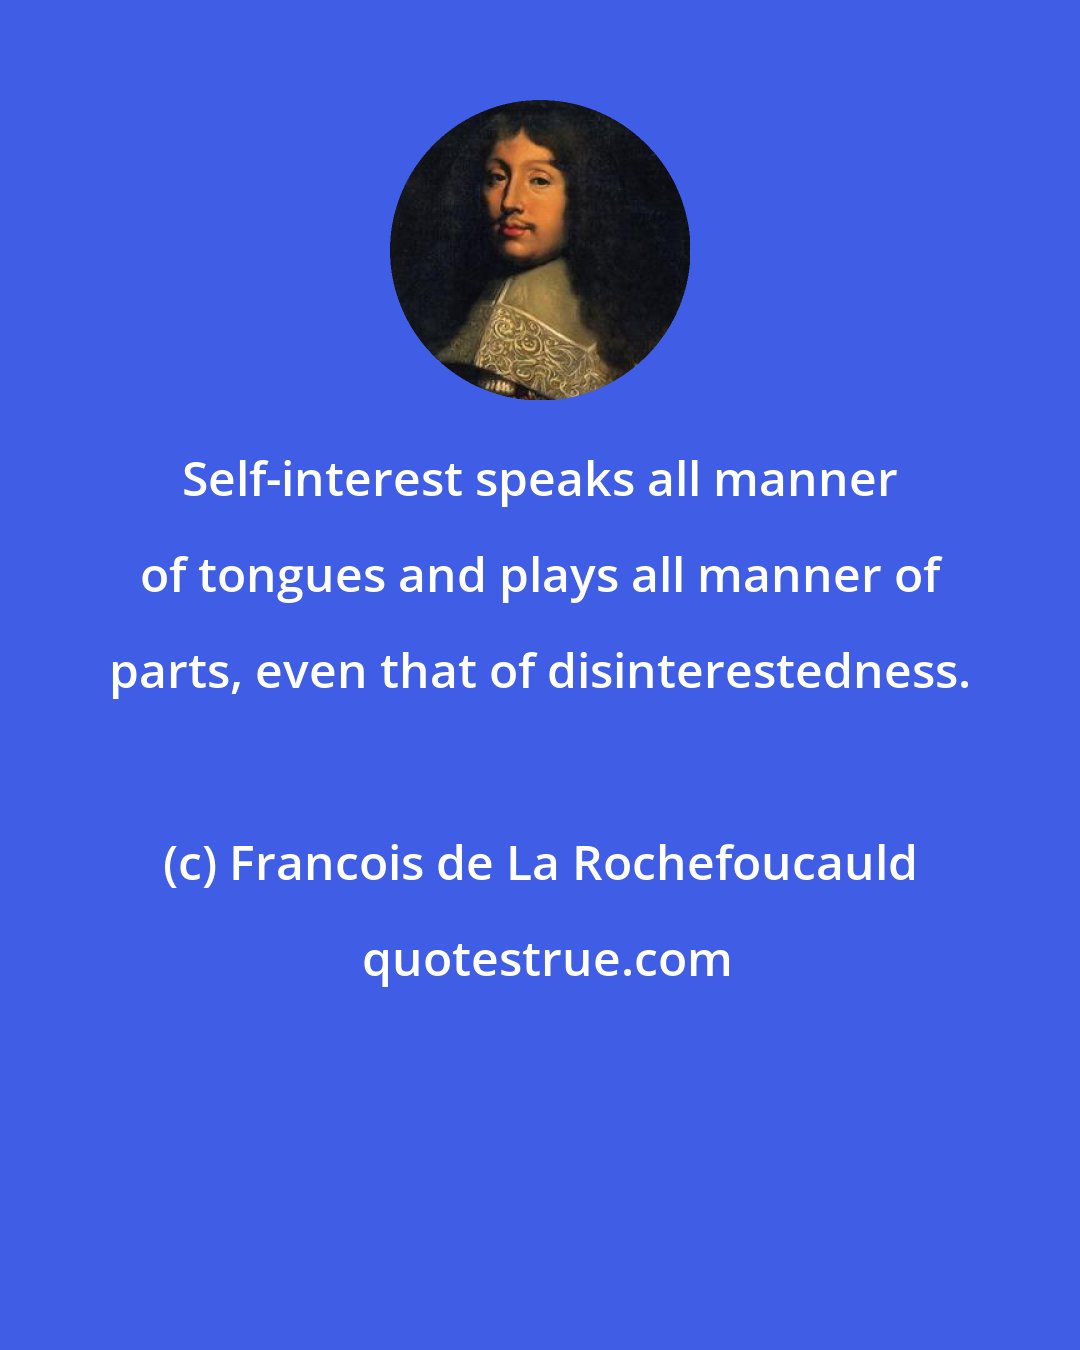 Francois de La Rochefoucauld: Self-interest speaks all manner of tongues and plays all manner of parts, even that of disinterestedness.